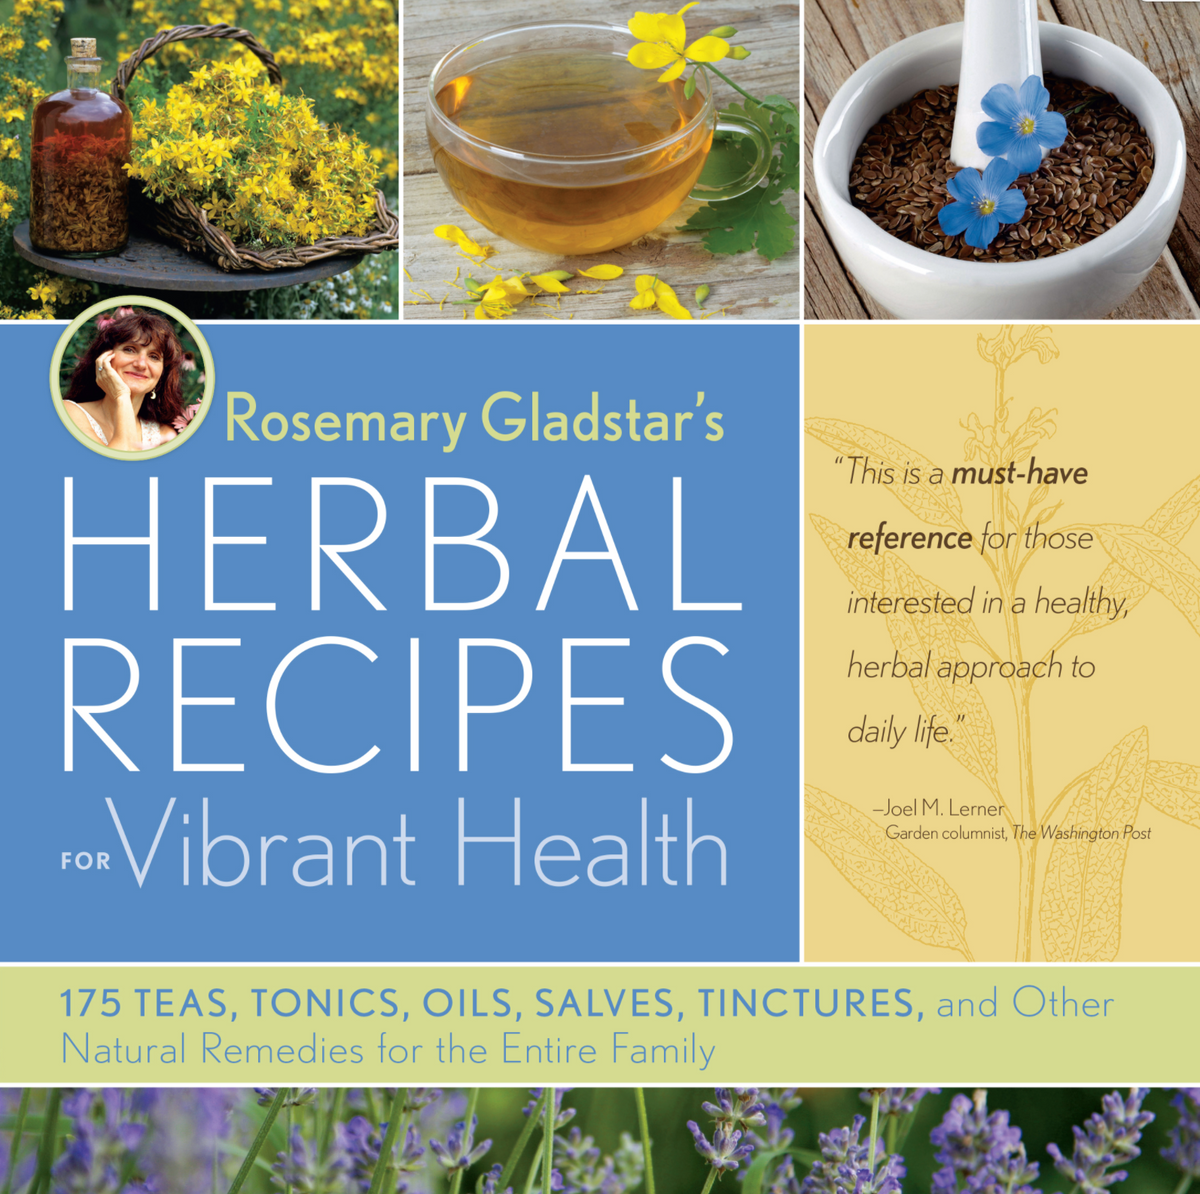 Herbal Recipes for Vibrant Health by Rosemary Gladstar